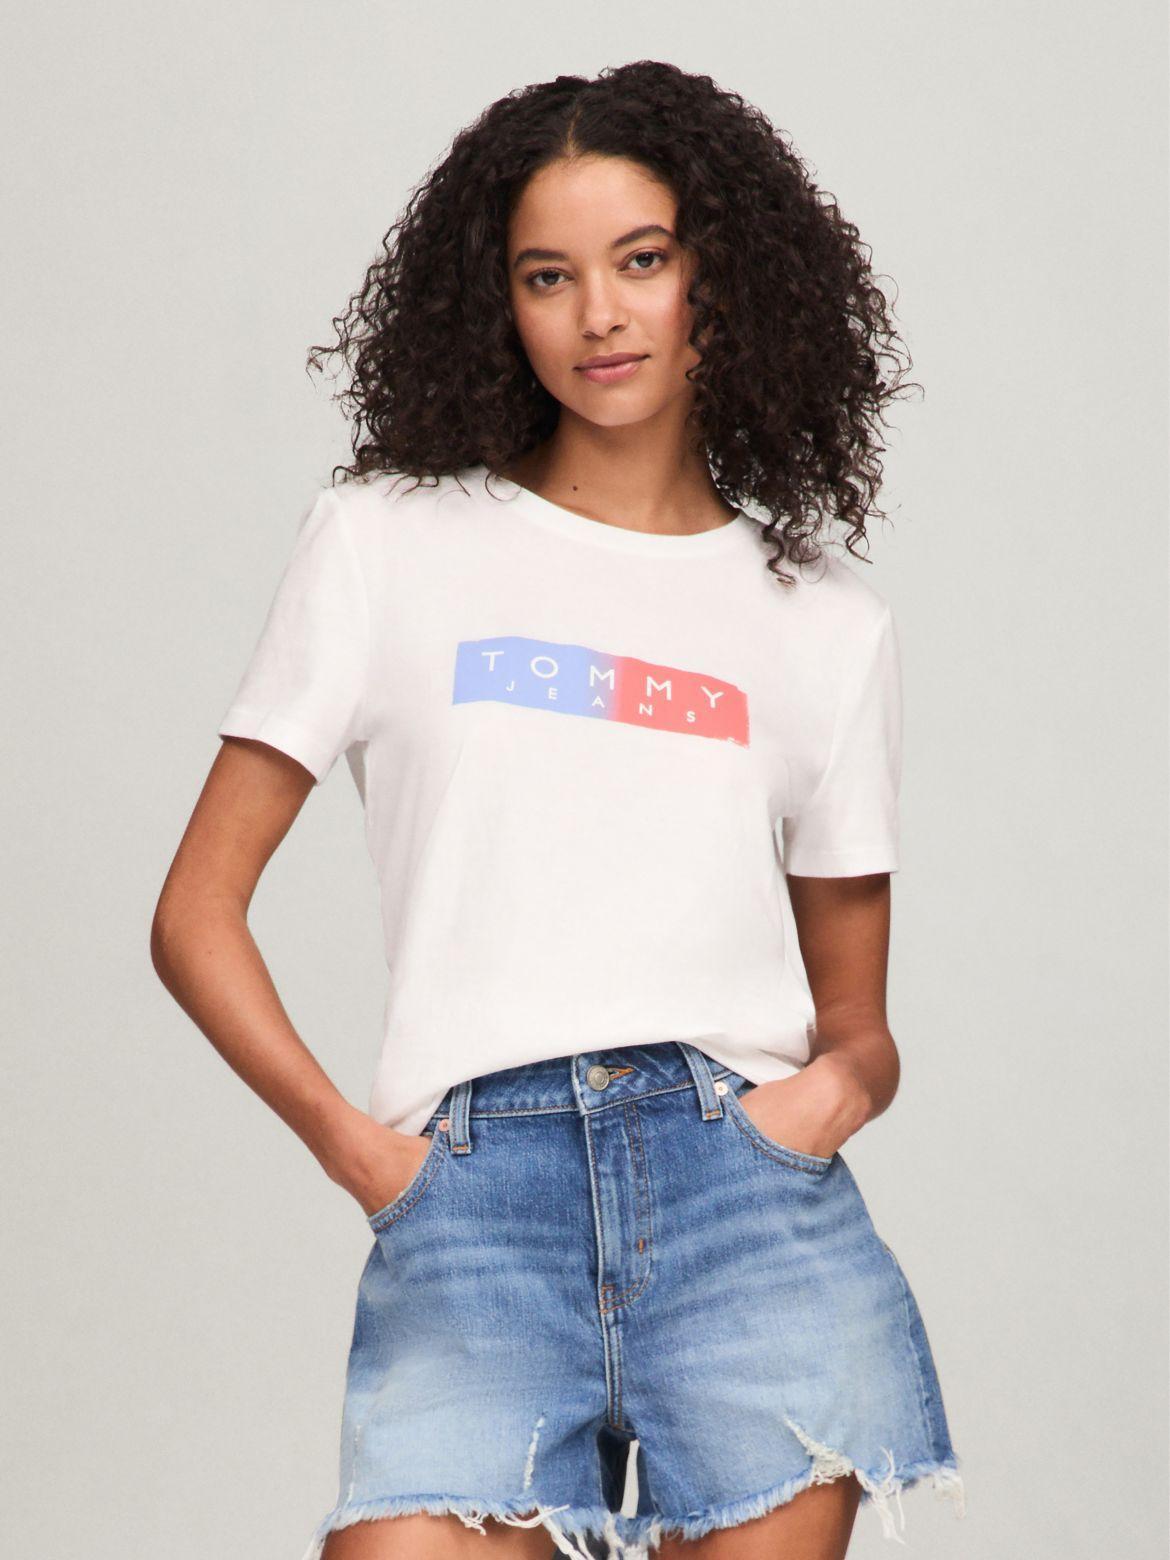 Tommy Hilfiger Women's Tommy Jeans Logo T-Shirt Product Image